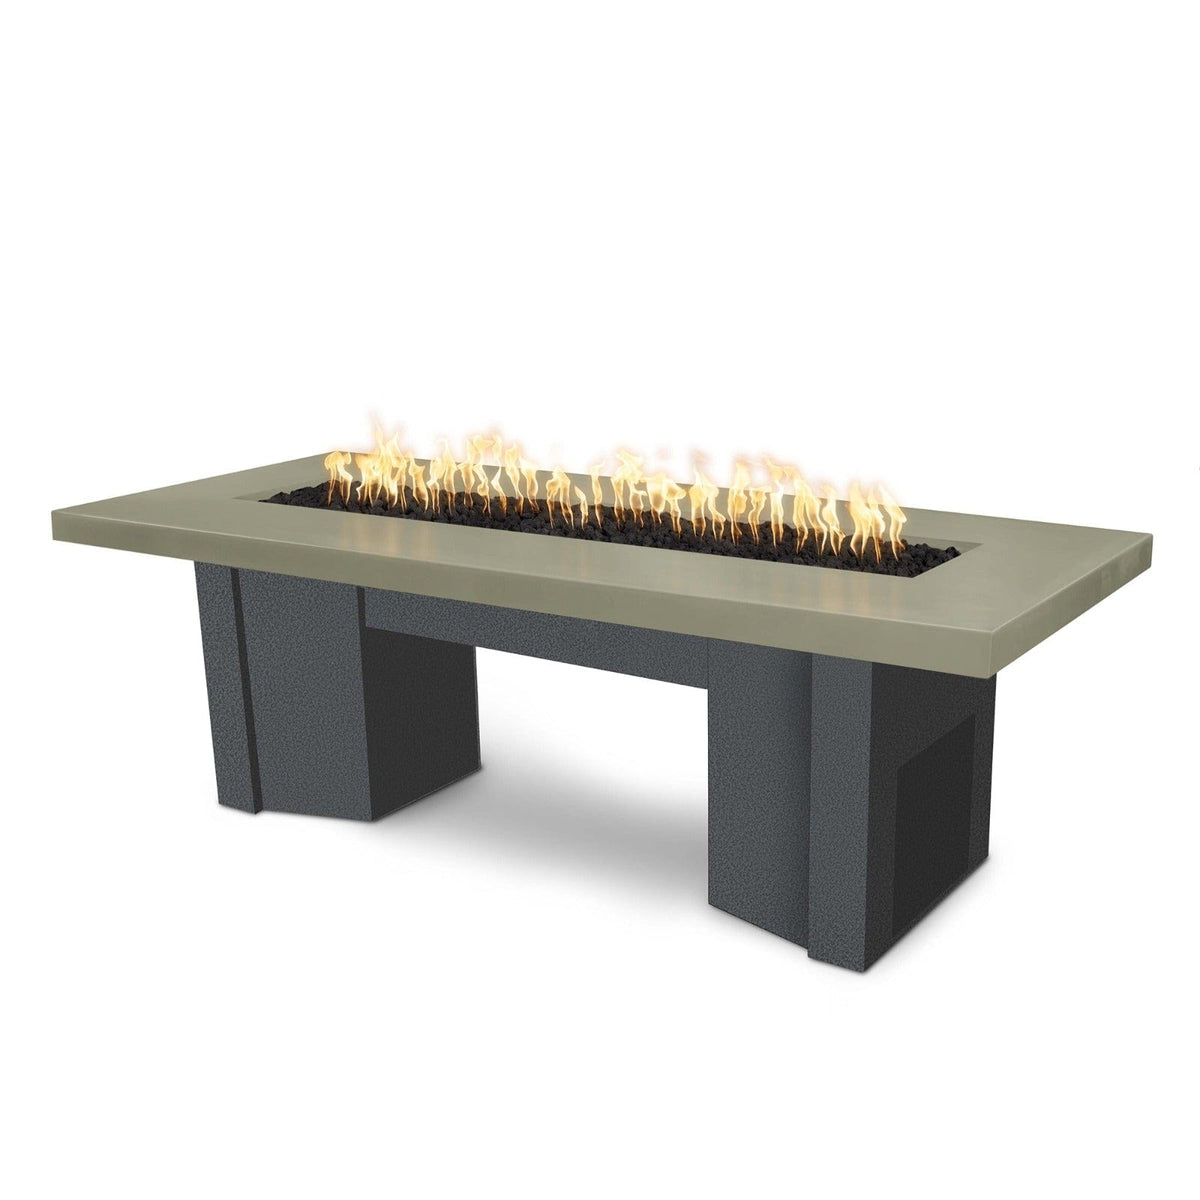 The Outdoor Plus Fire Features Ash (-ASH) / Silver Vein Powder Coated Steel (-SLV) The Outdoor Plus 78&quot; Alameda Fire Table Smooth Concrete in Liquid Propane - 110V Plug &amp; Play Electronic Ignition / OPT-ALMGFRC78EKIT-LP